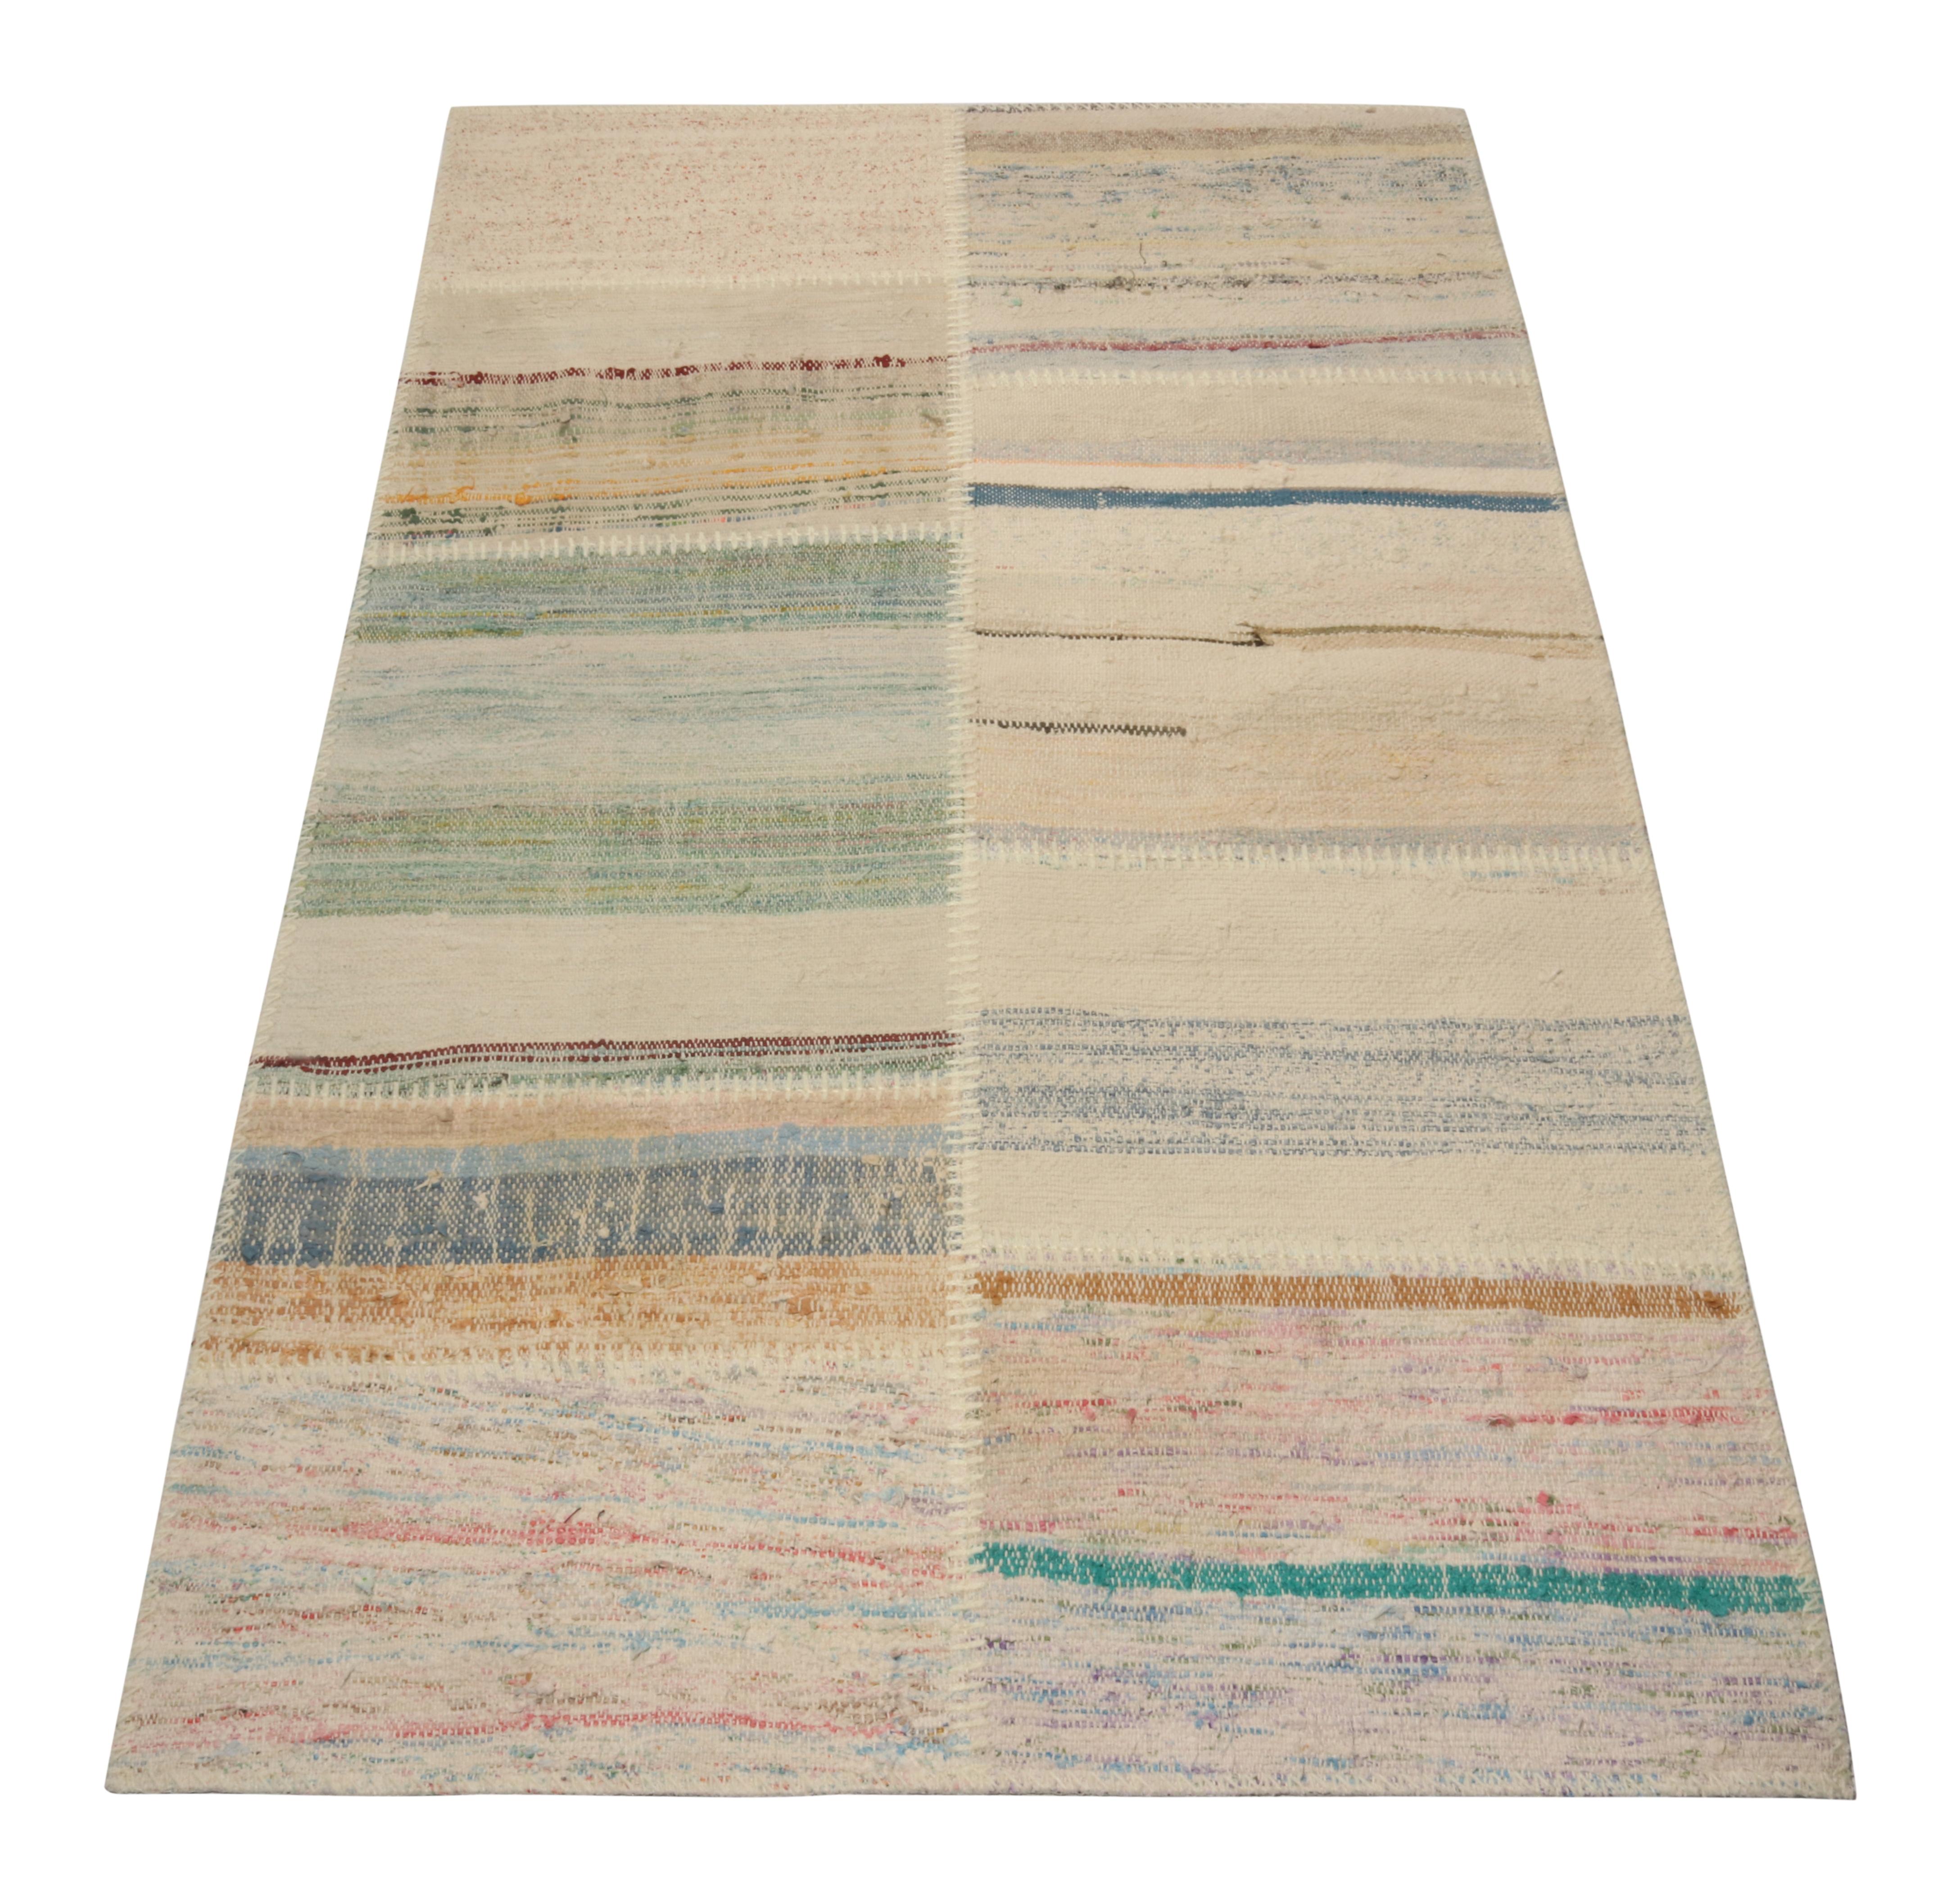 Handwoven in wool, Rug & Kilim presents a 3x5 rug from their innovative new patchwork kilim collection. 

On the Design: 

This flat weave technique repurposes vintage yarns in polychromatic stripes and striae, achieving a playful look with fabulous